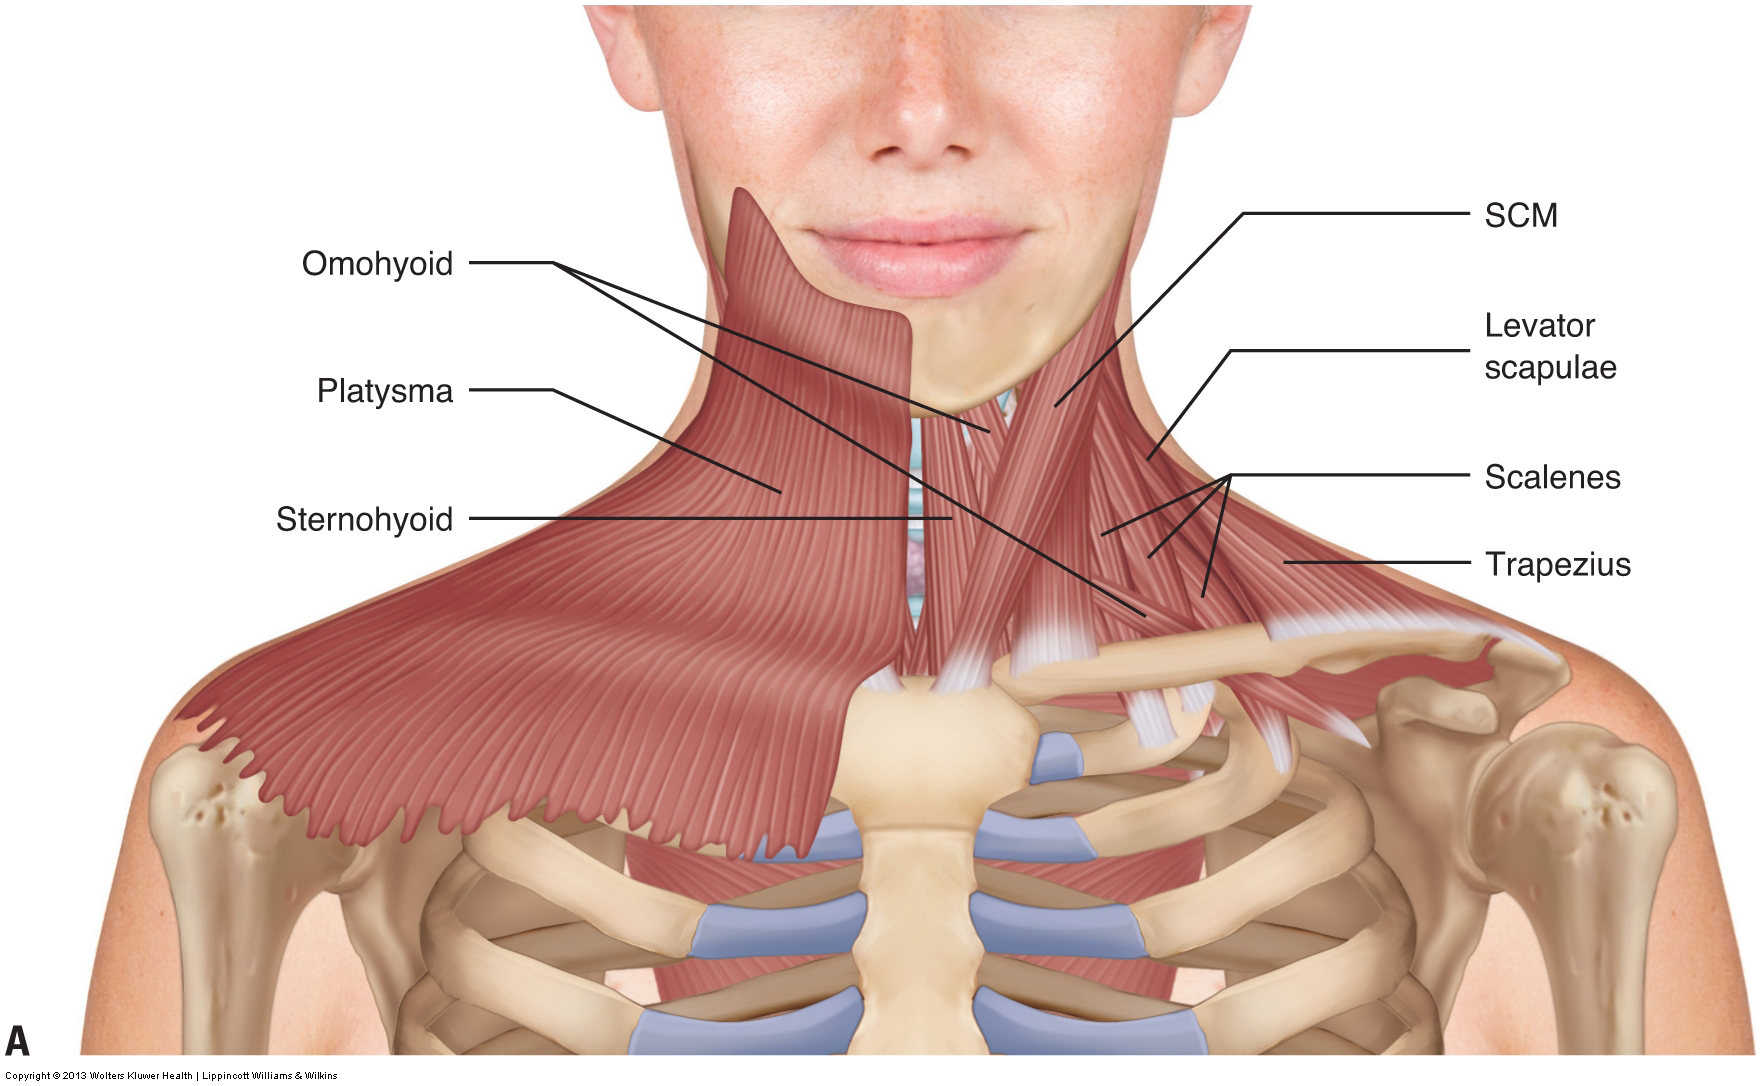 Muscles of the neck / musculature of the cervical spine